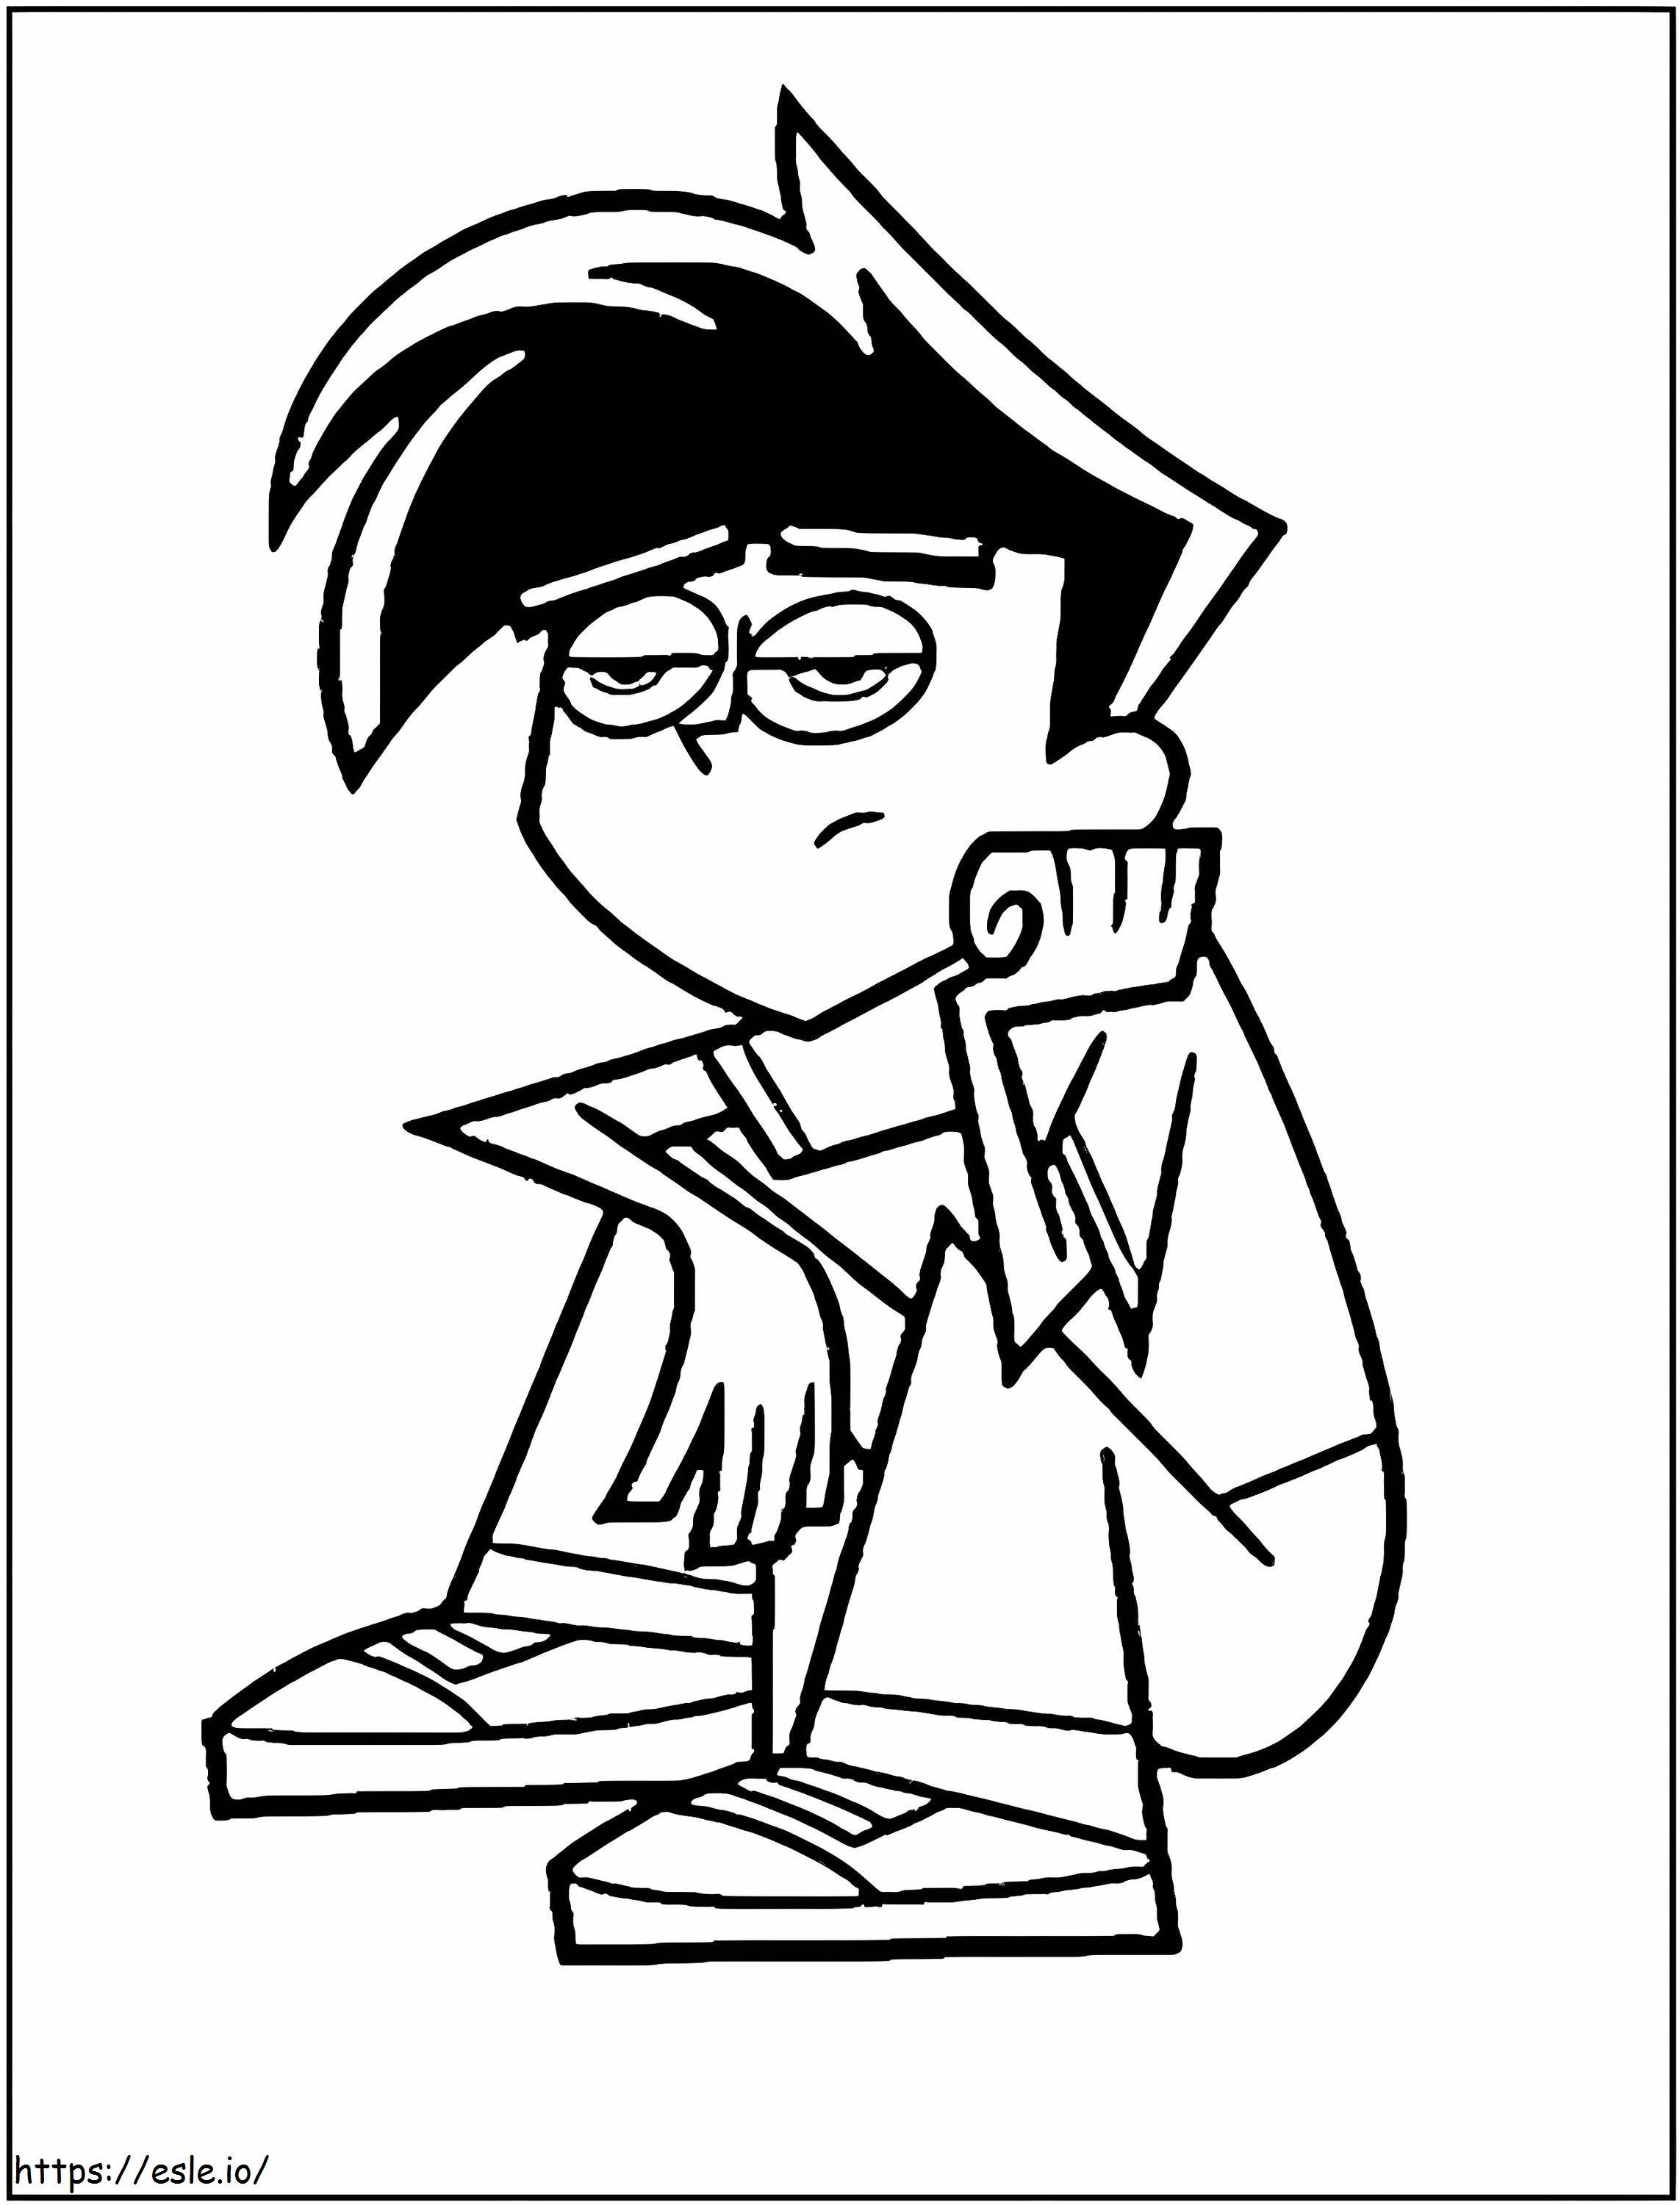 Danny Phantom Is Bored coloring page